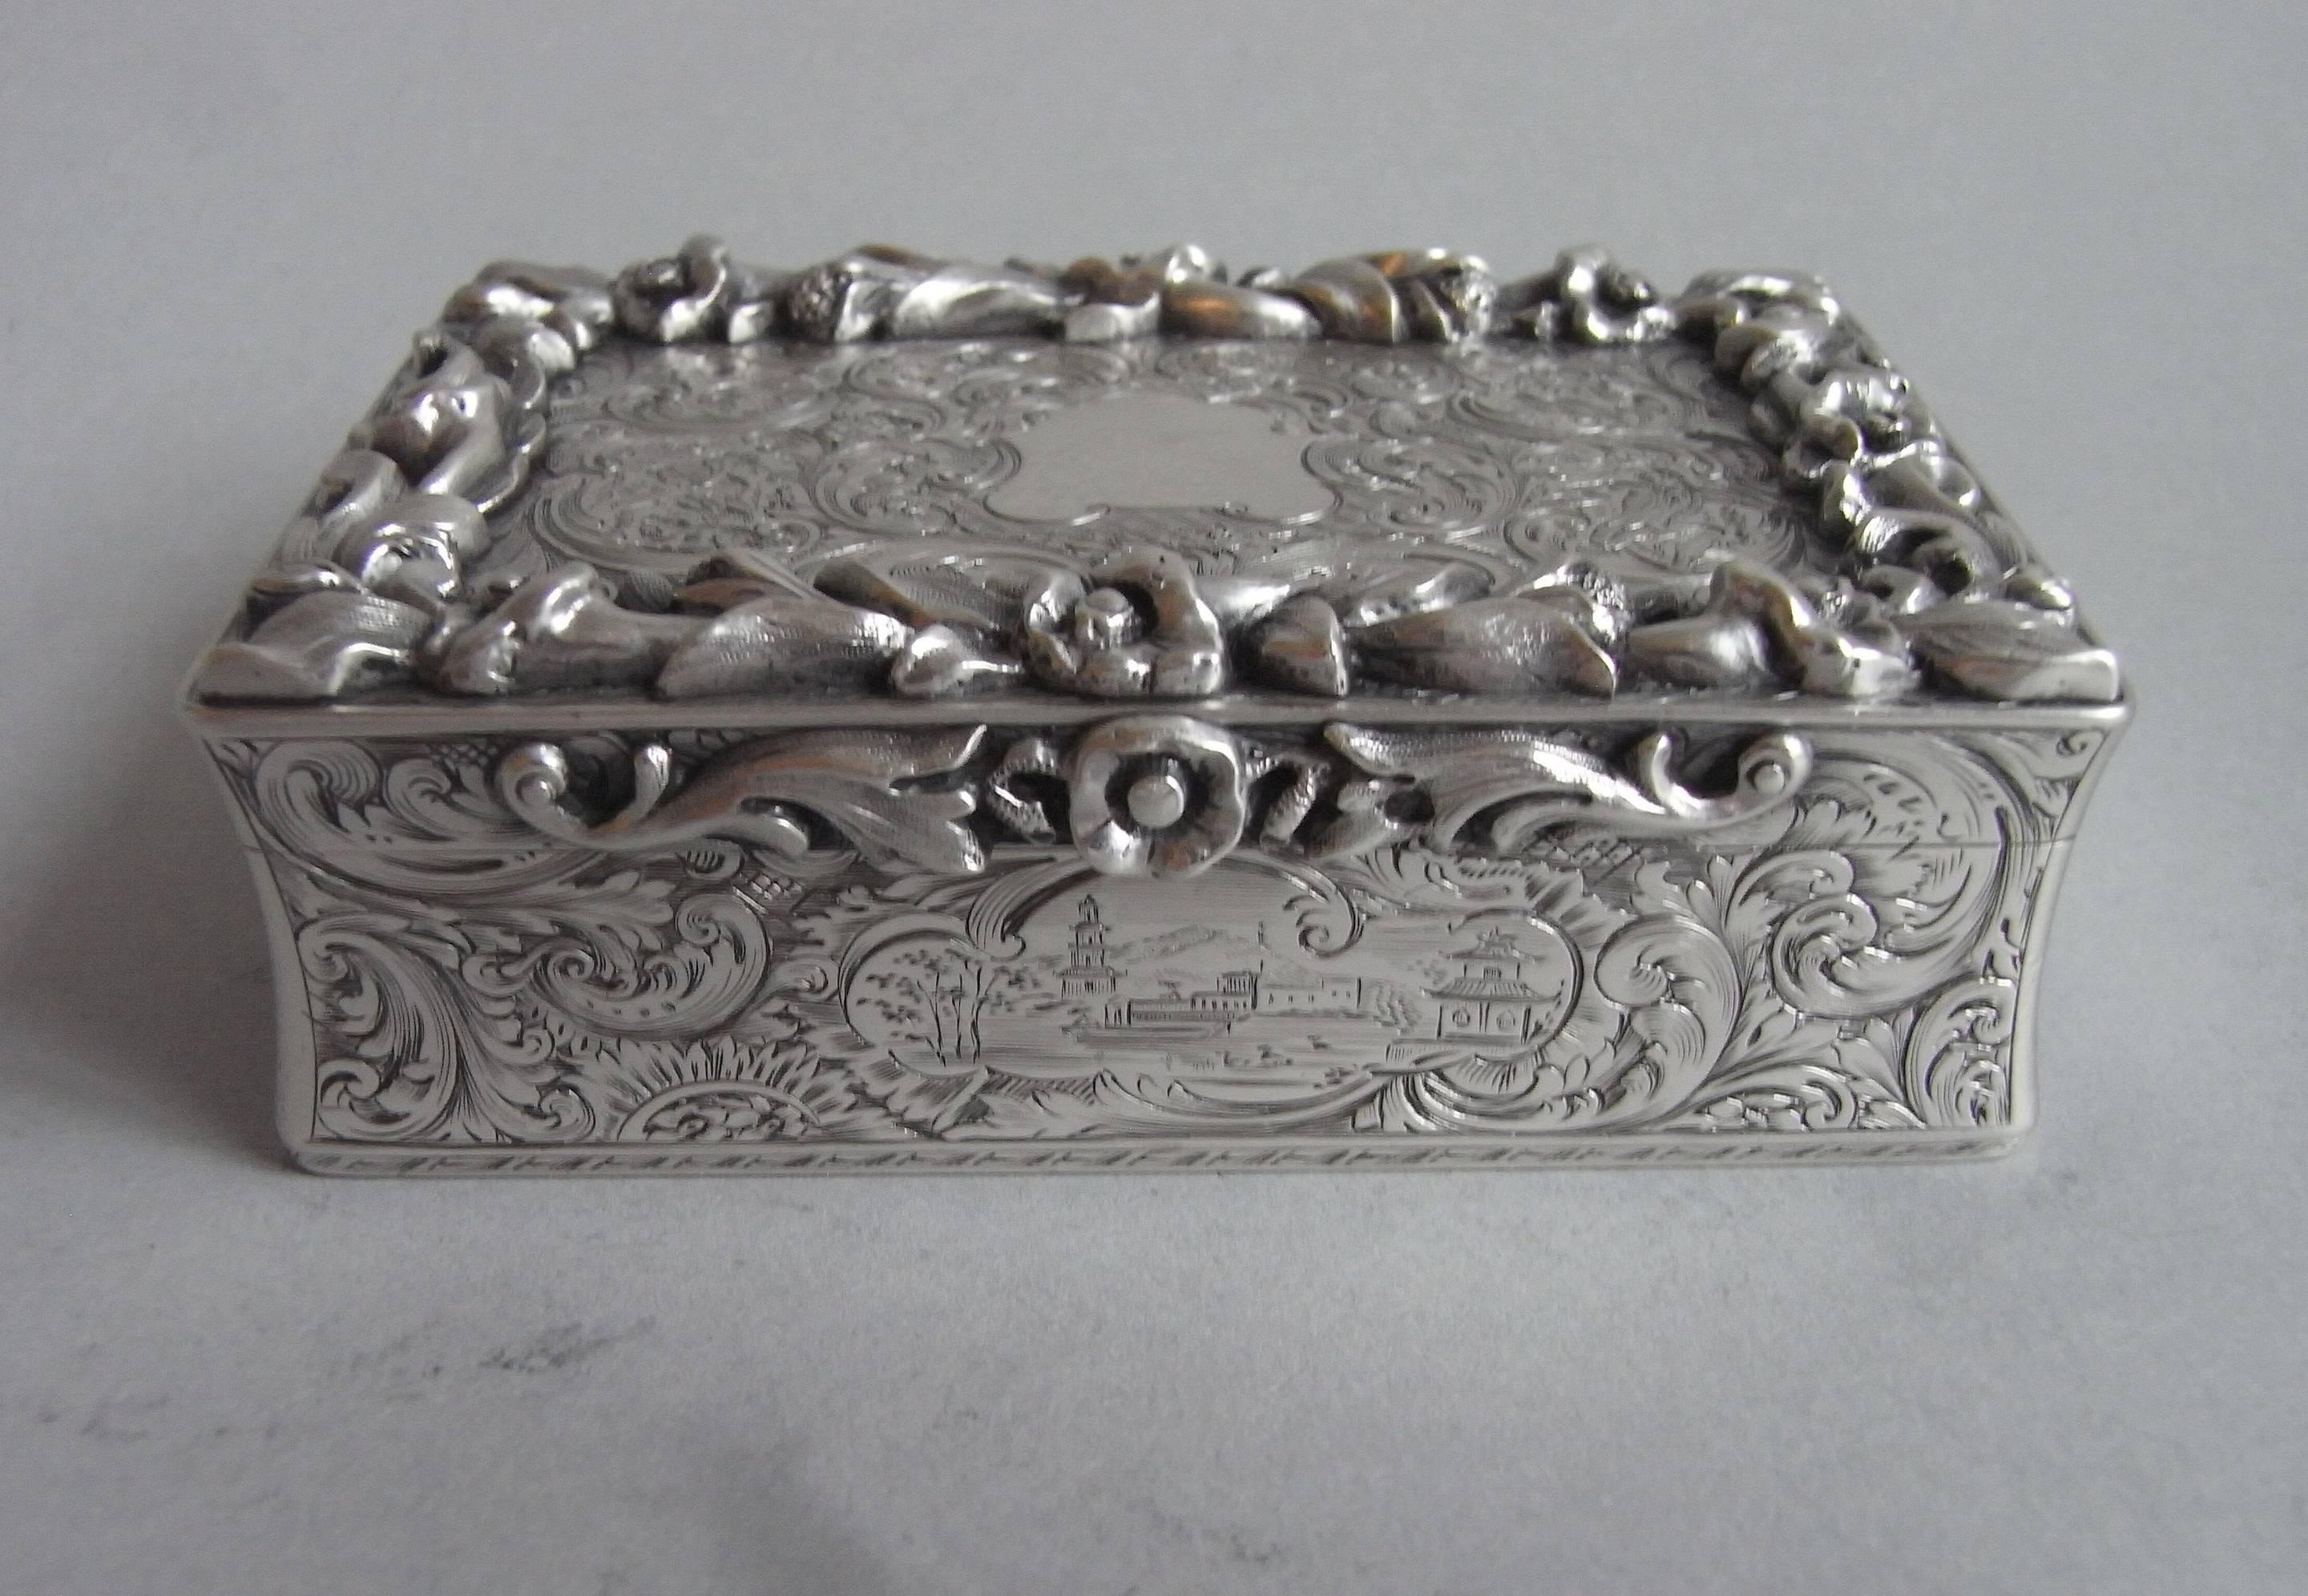 The snuff box is of broad rectangular form and has slightly incuse corners. The cover displays an outer cast raised border of trailing foliage and flower heads in bloom. This border encloses an exceptionally engraved panel of pluming scrolls and